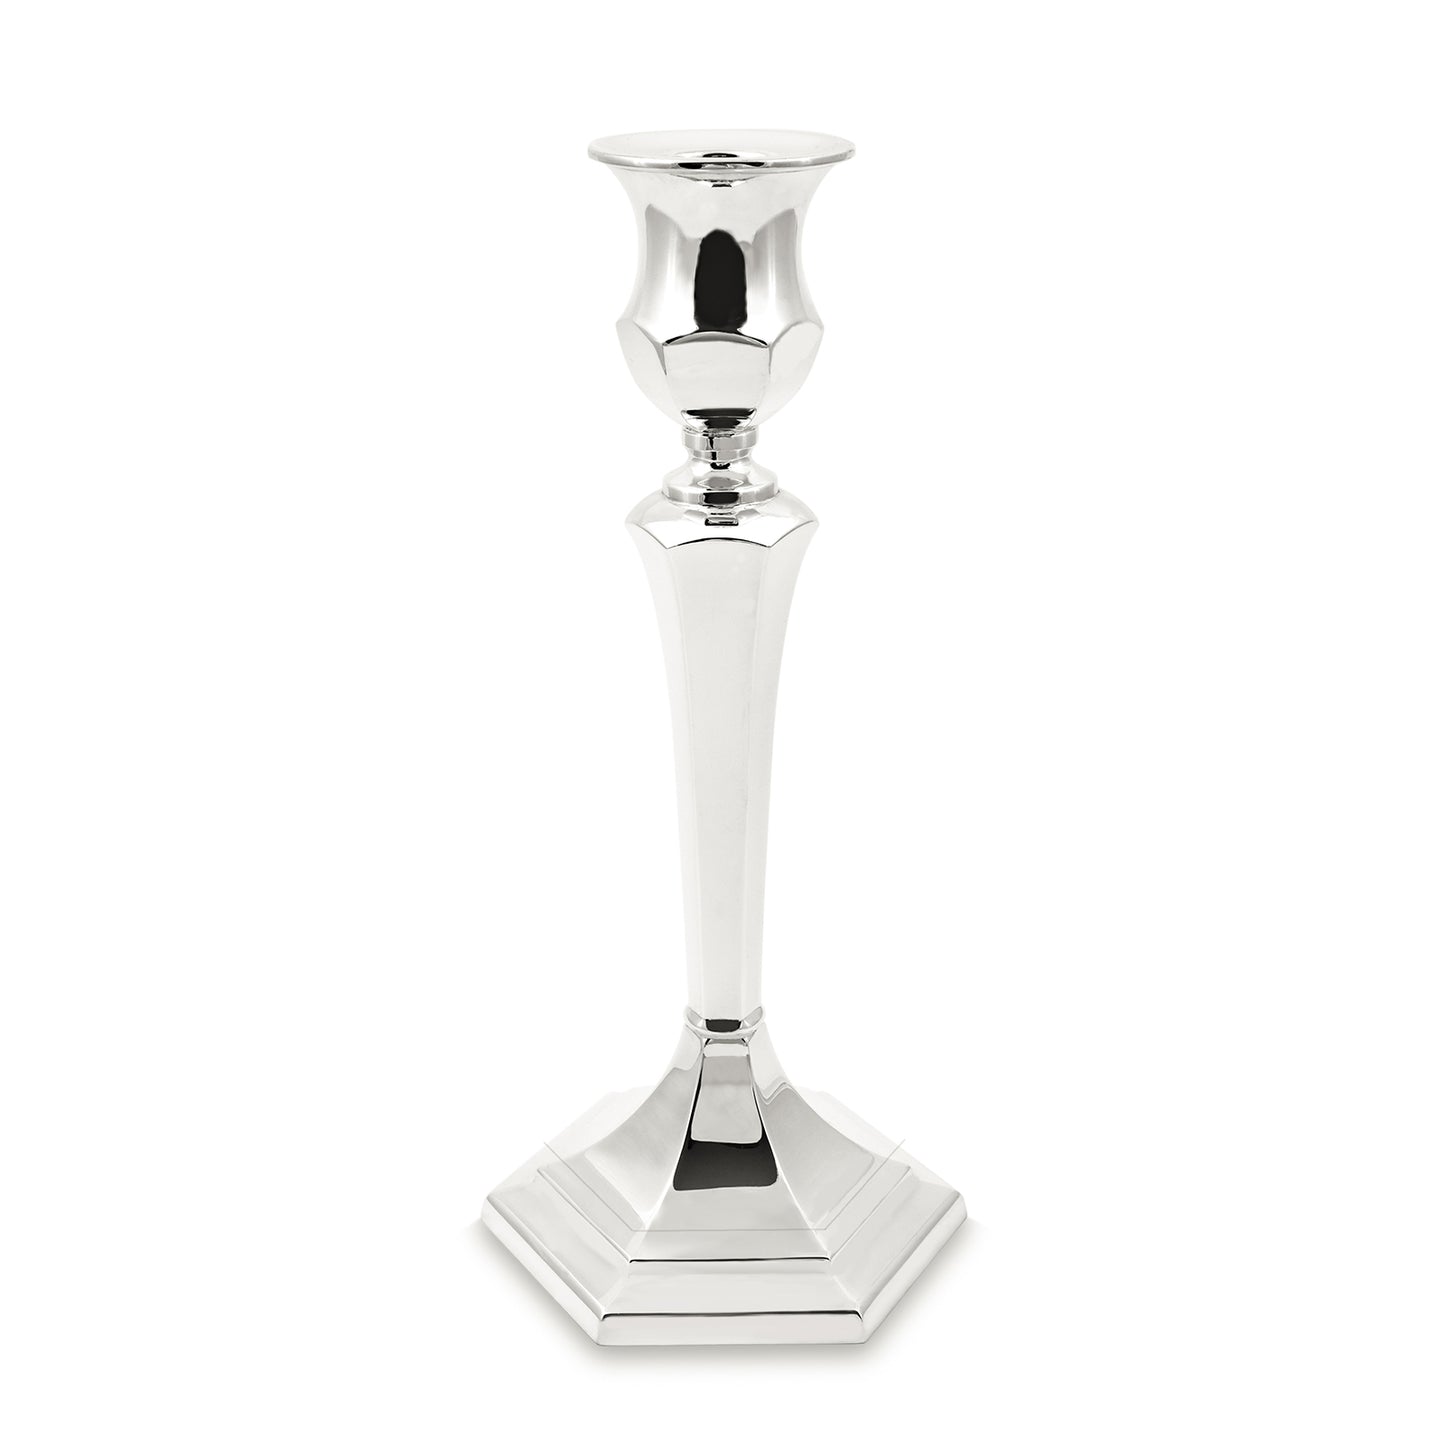 HEXAGON CANDLESTICK - STERLING SILVER